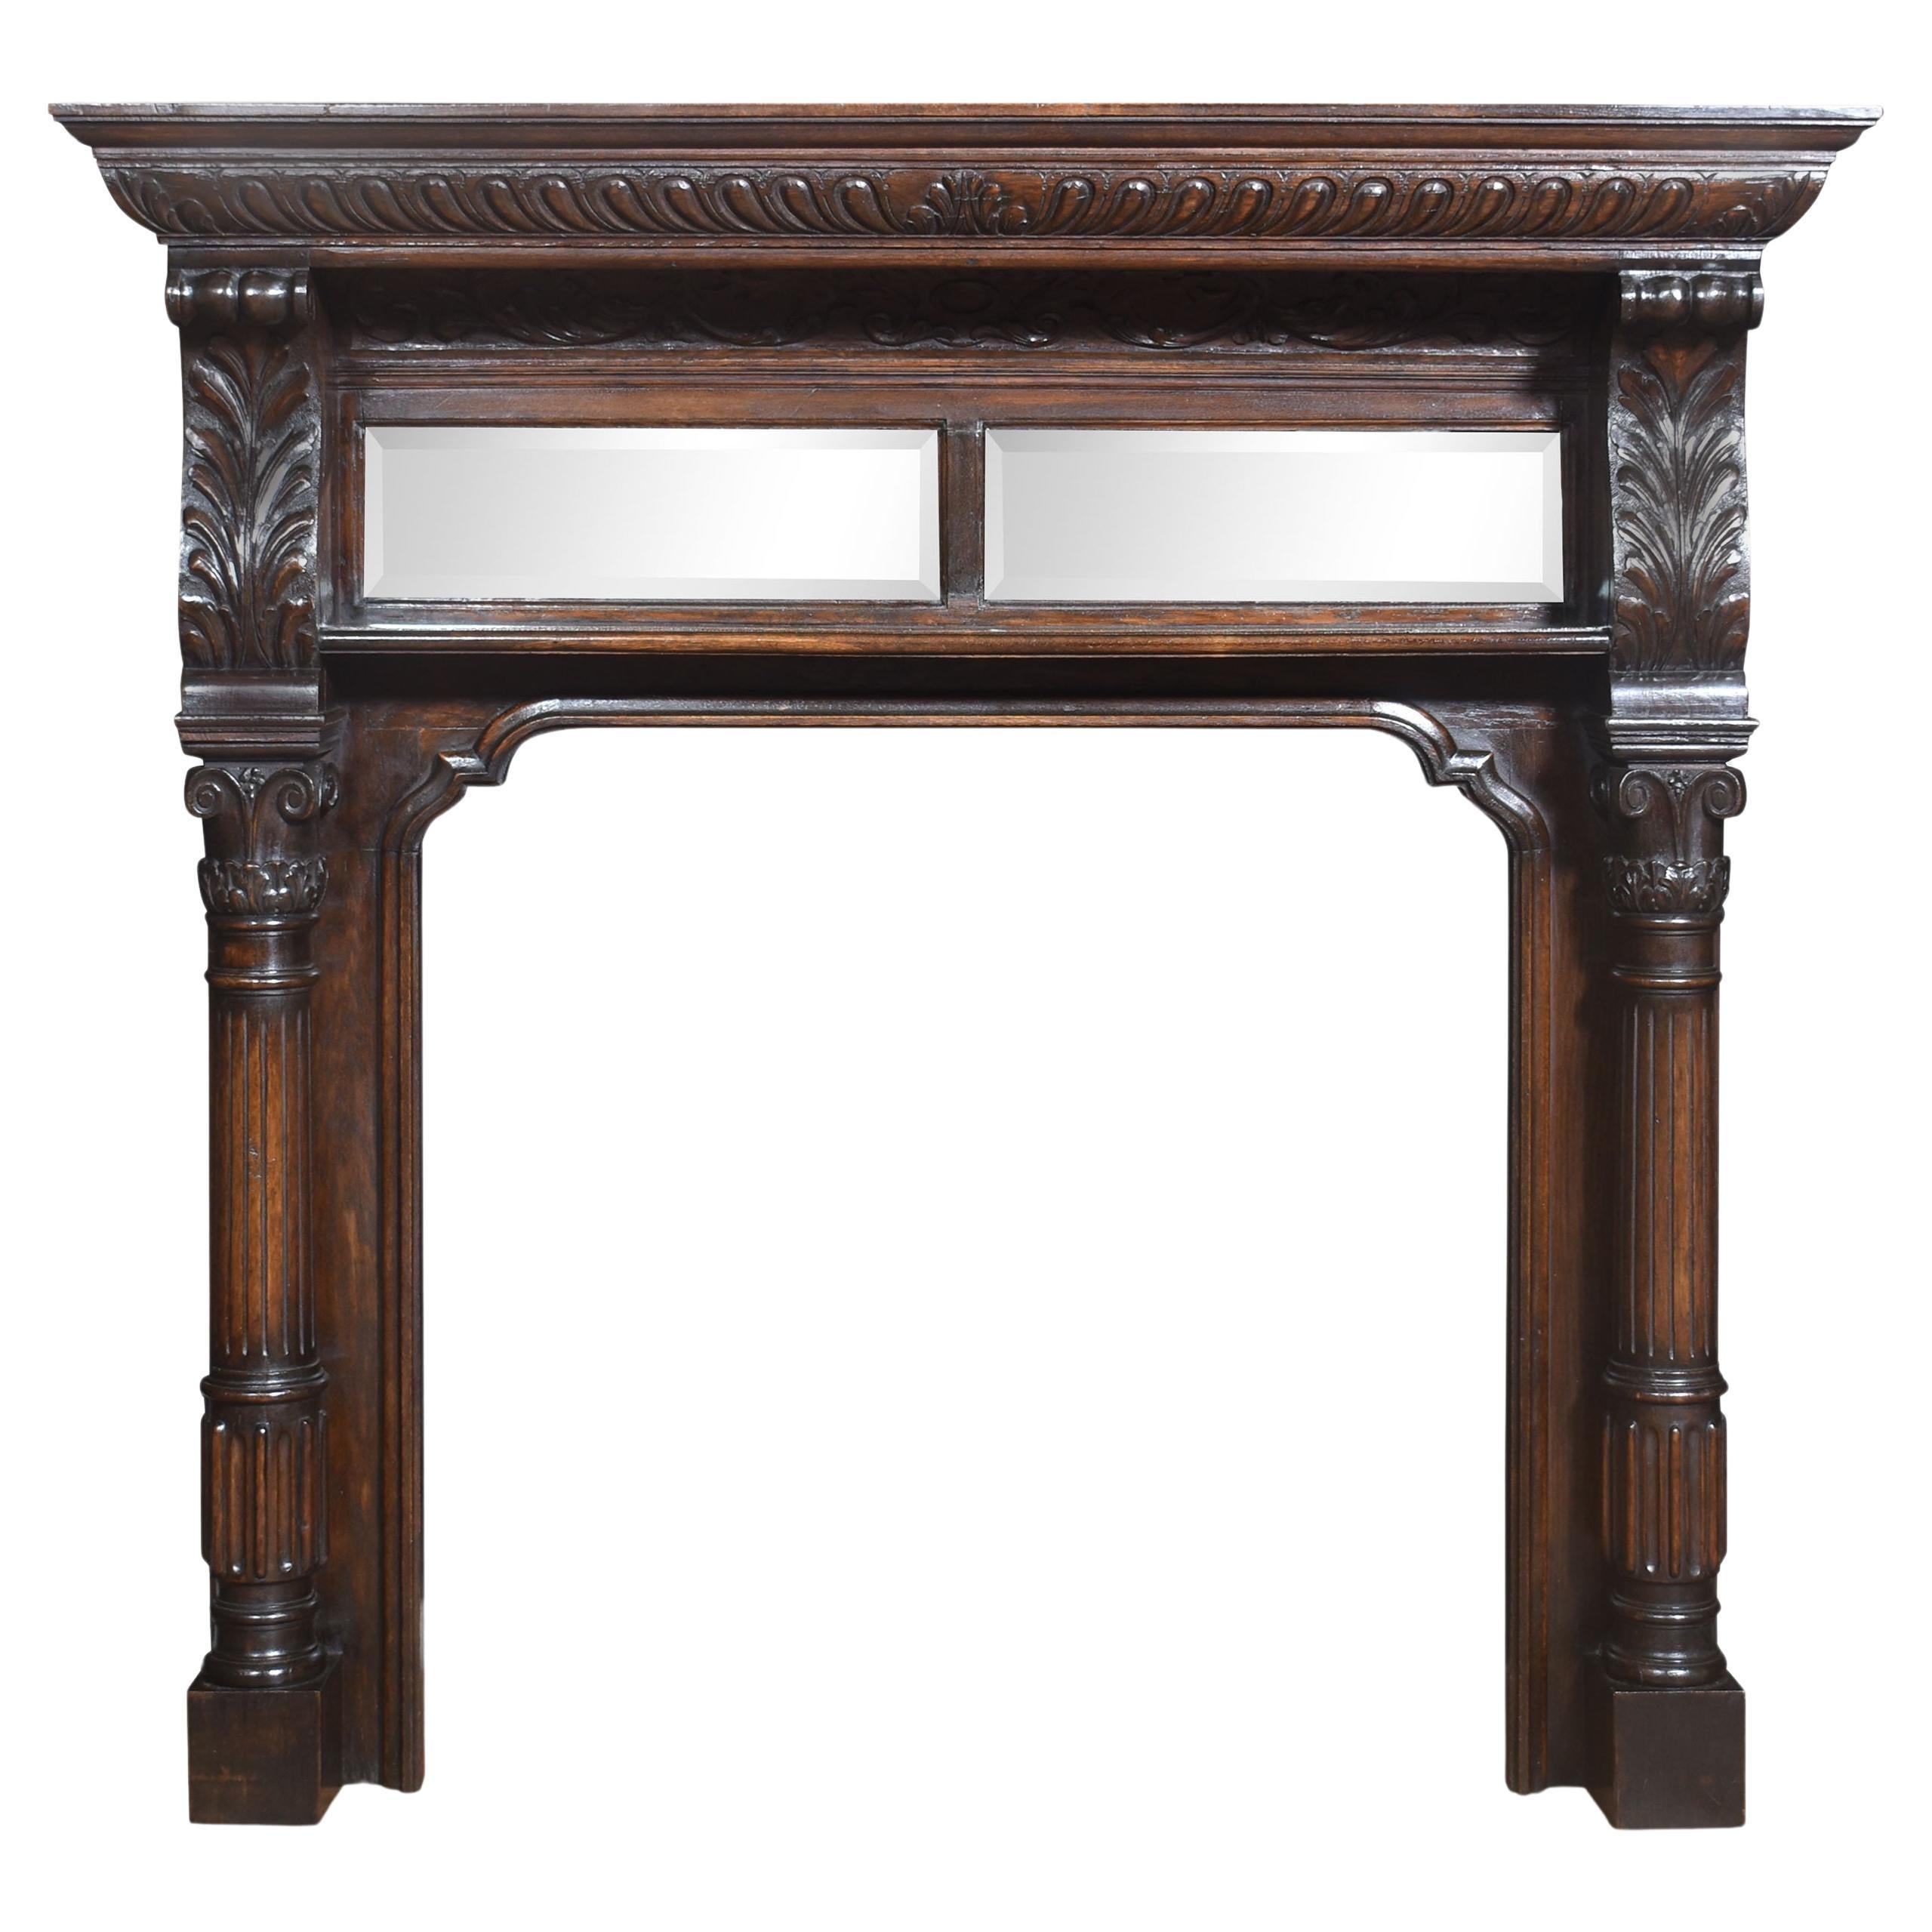 Carved oak fire surround